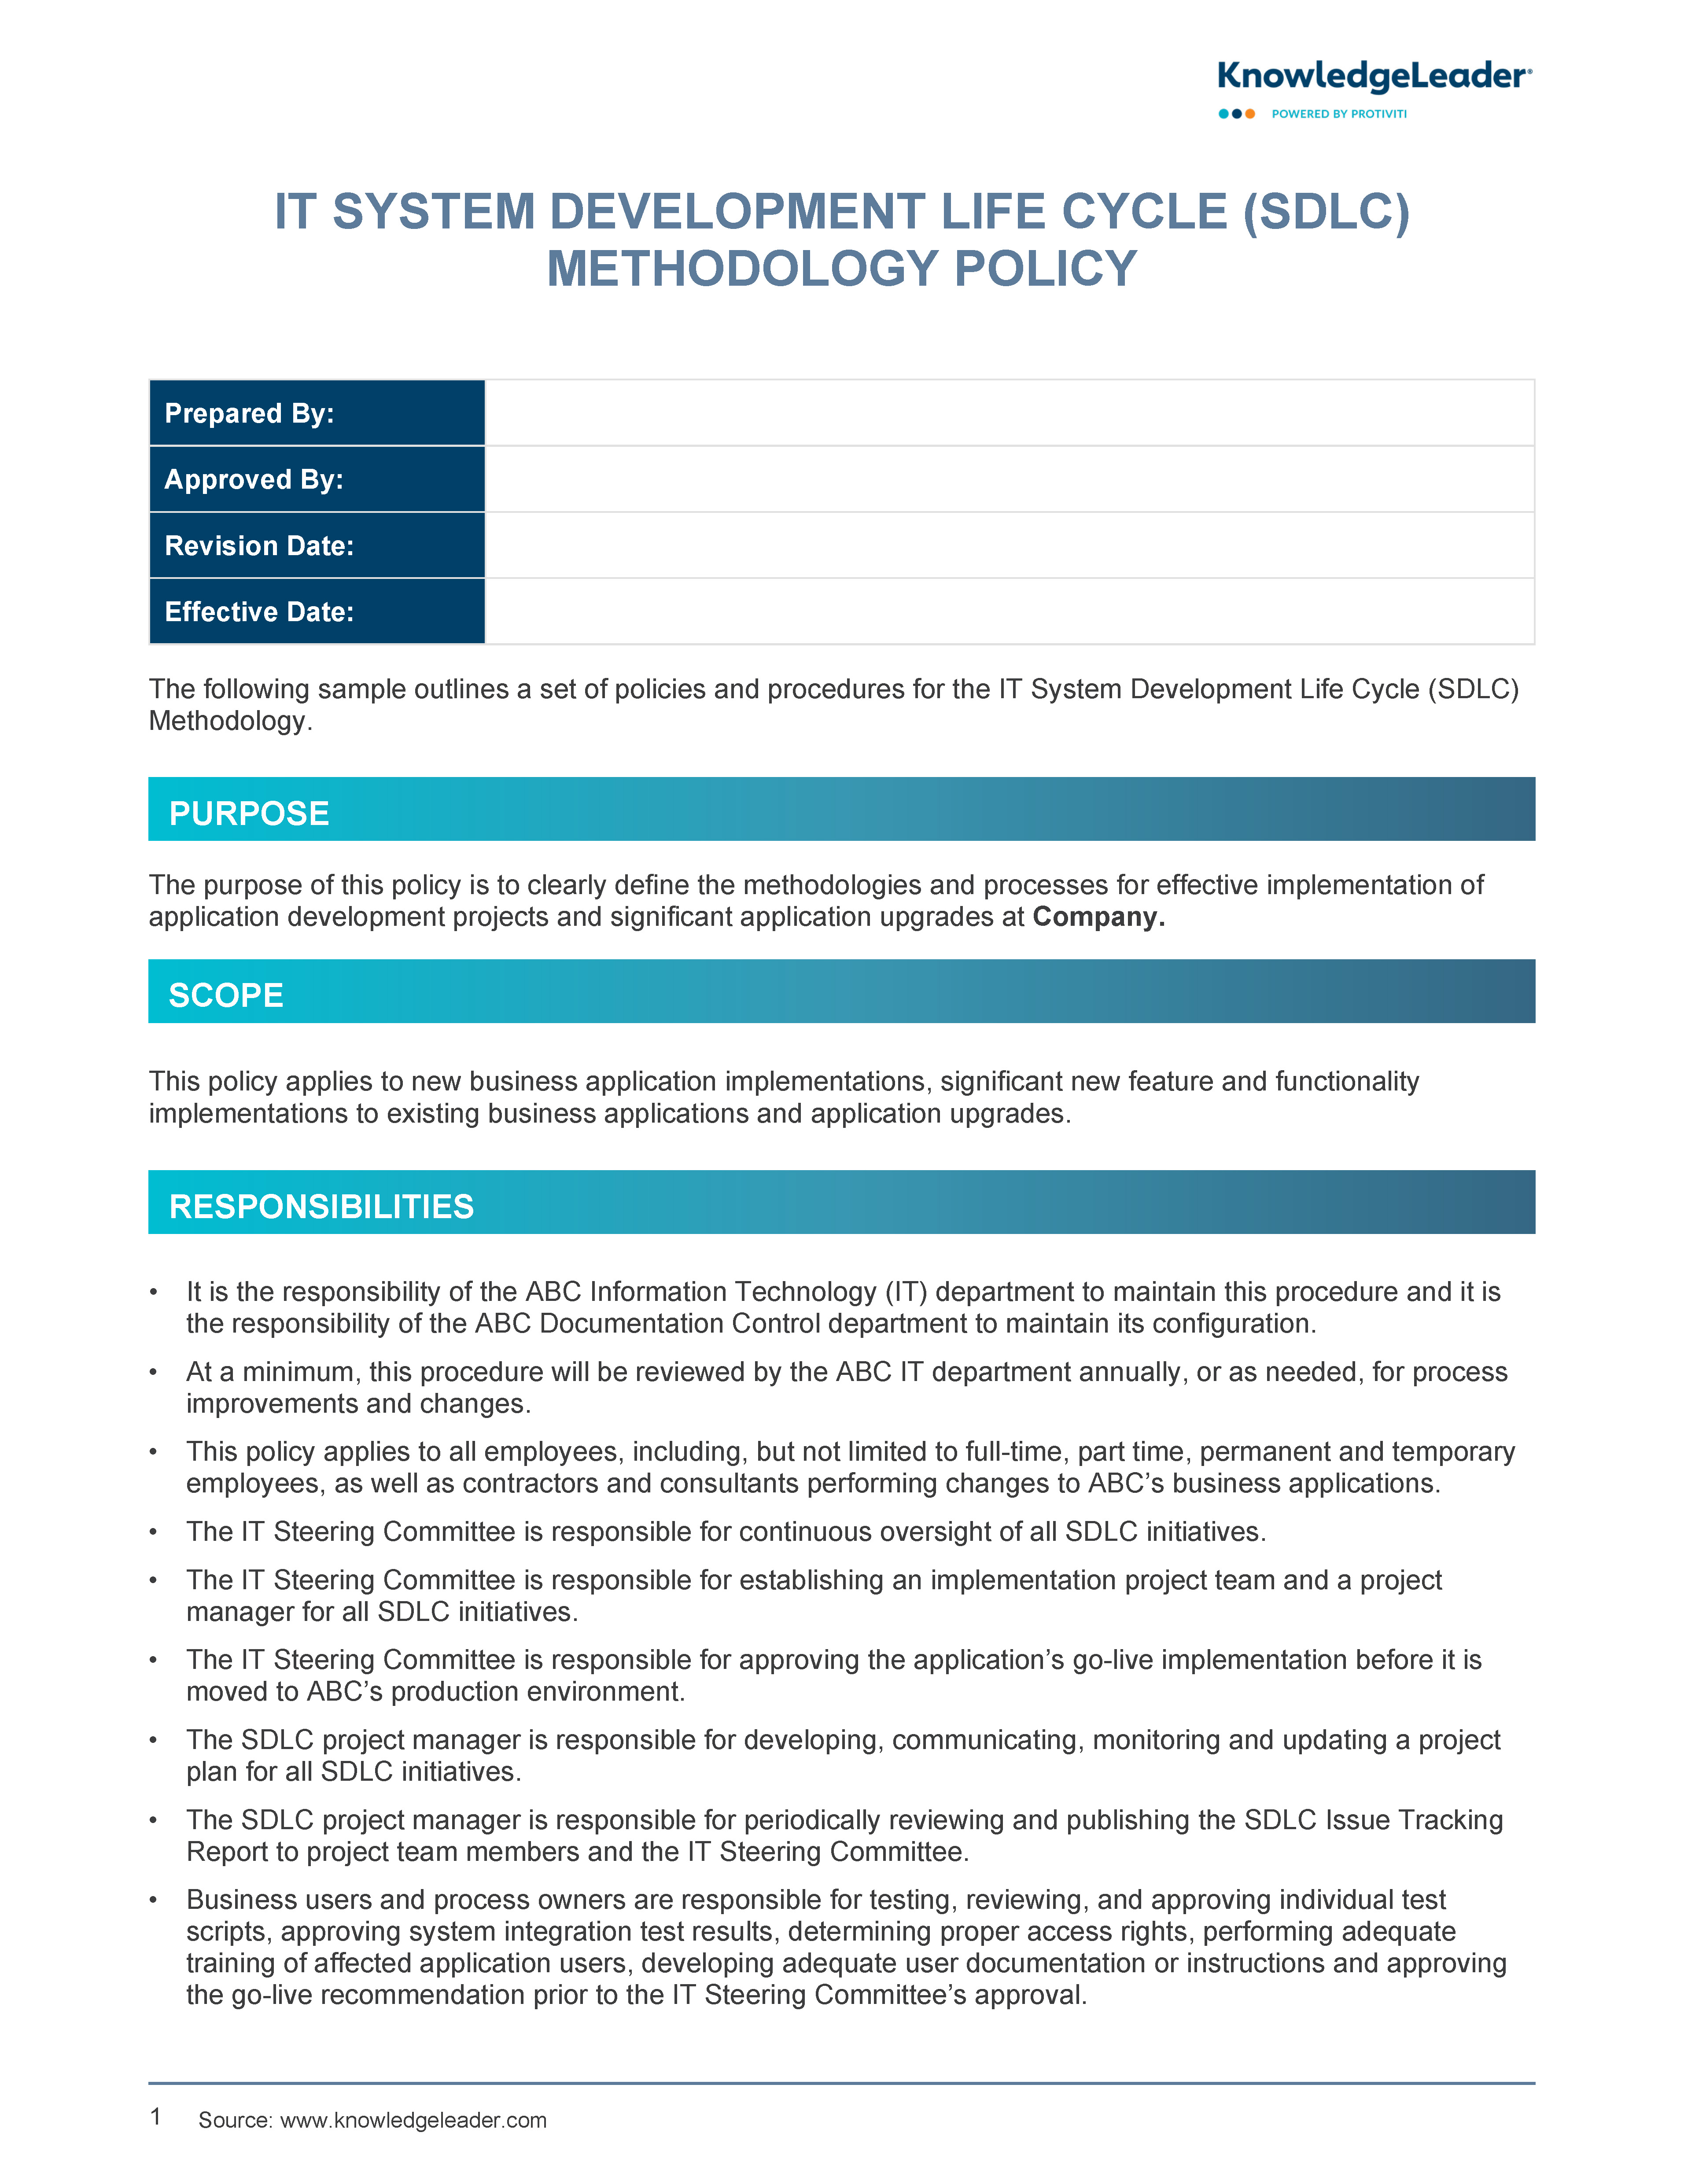 Screenshot of the first page of IT System Development Life Cycle Methodology Policy